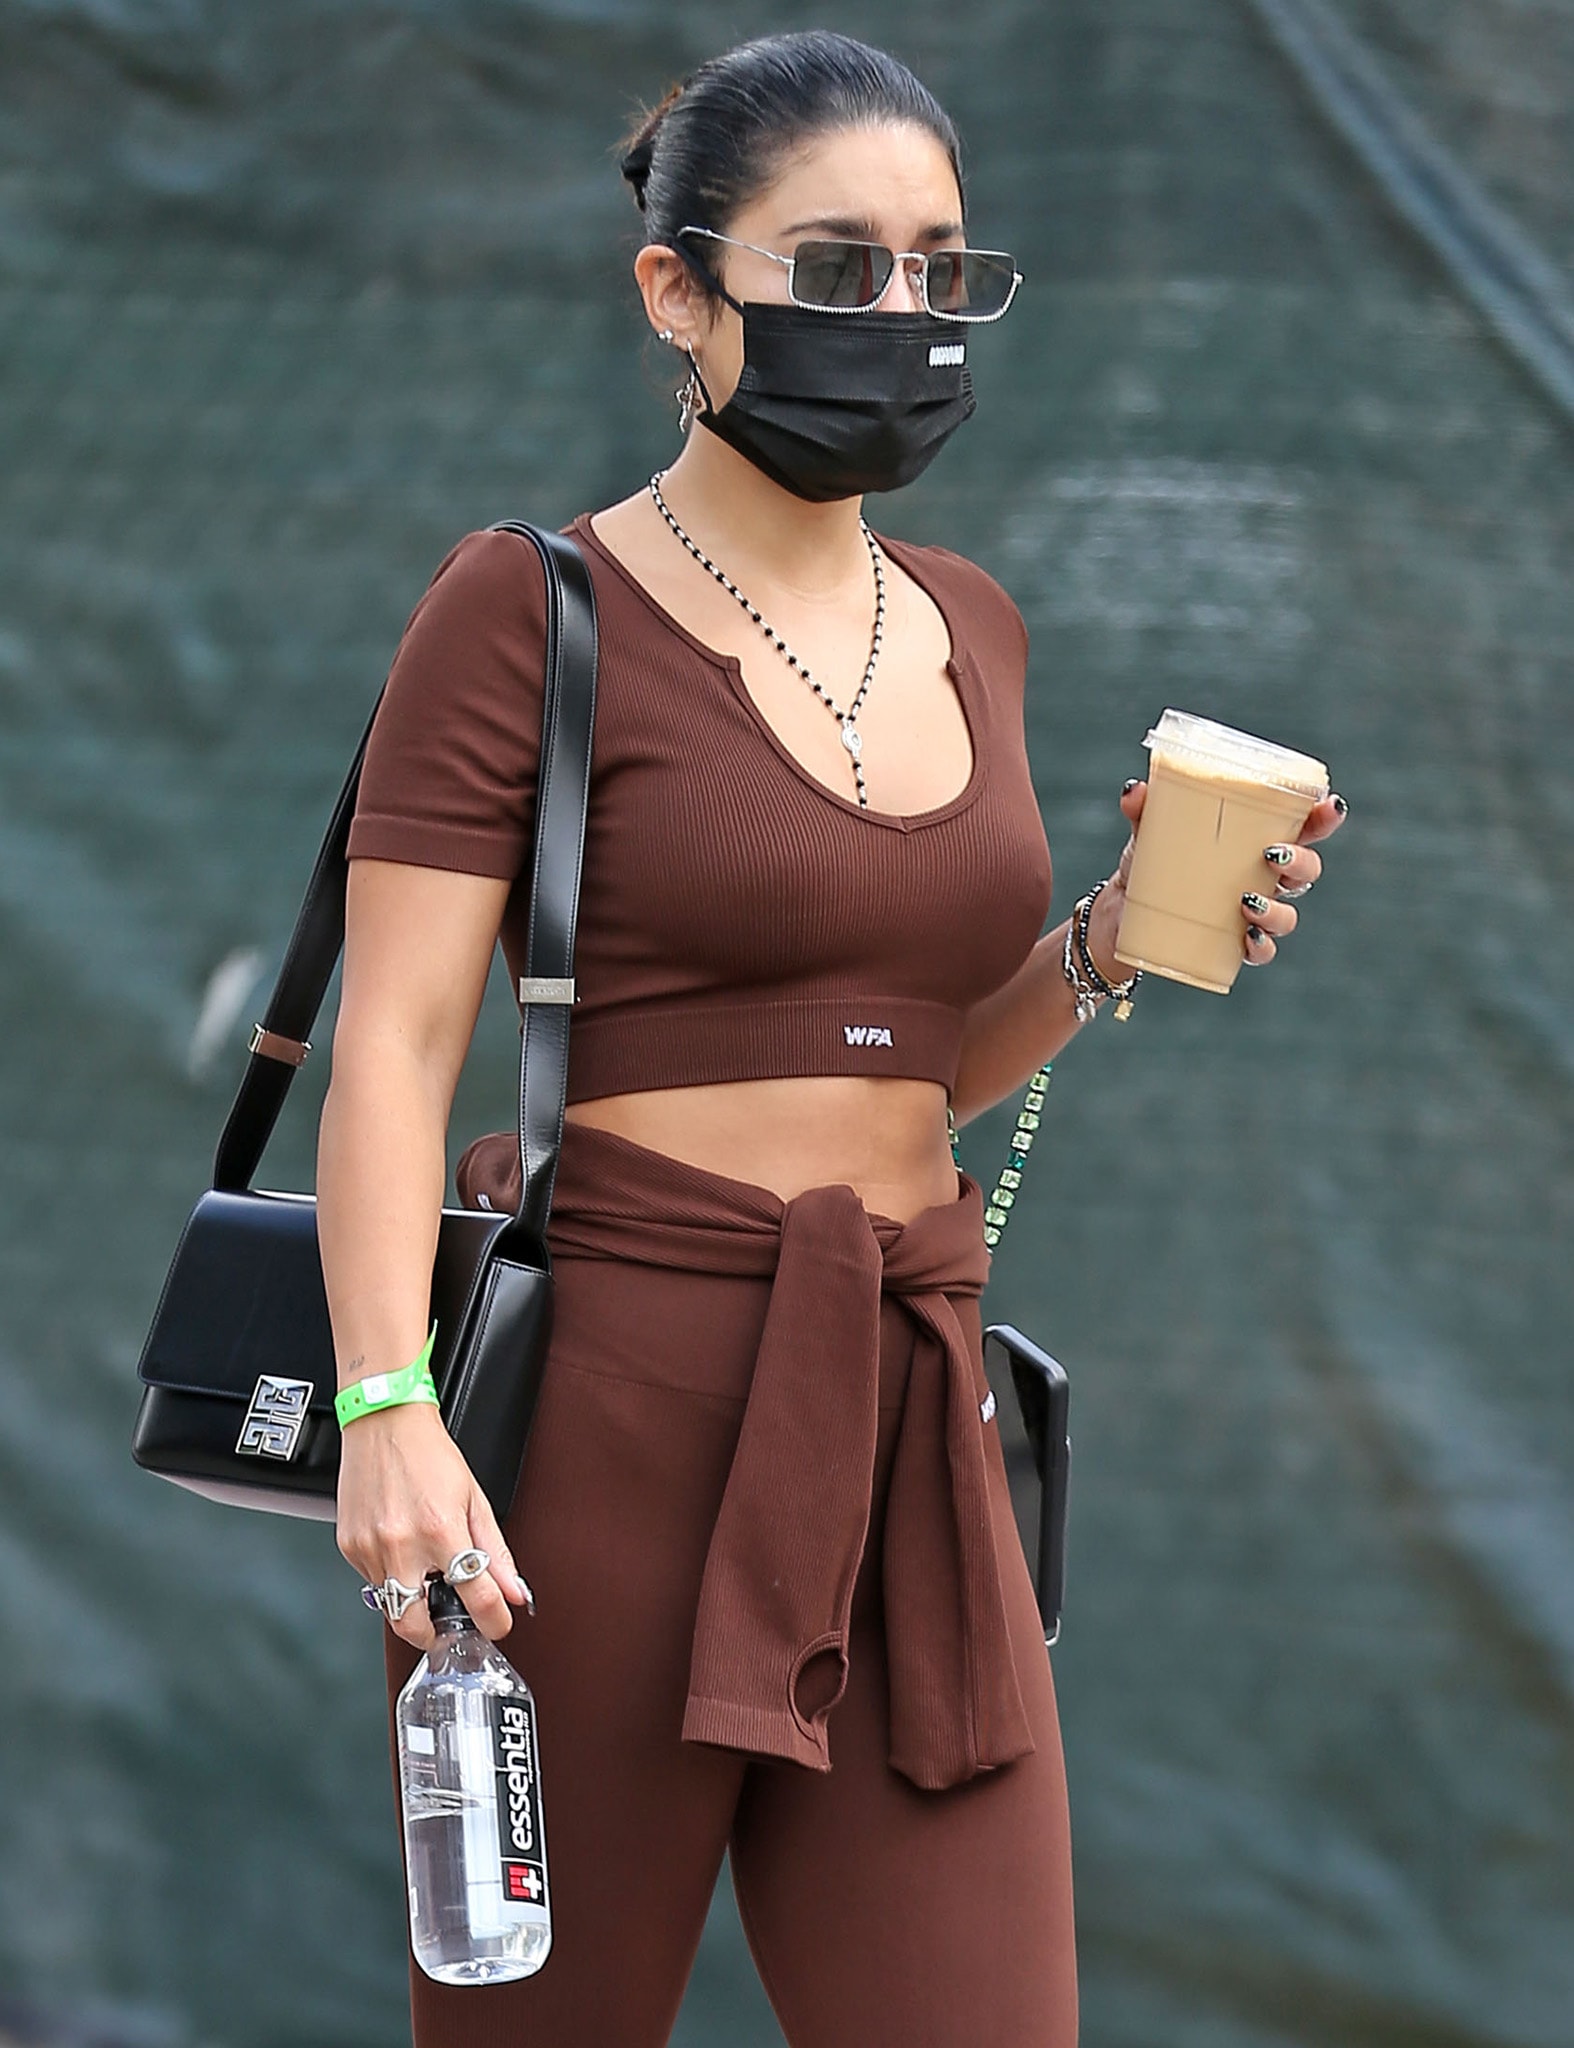 Vanessa Hudgens finishes off her look with Mercer Amsterdam shoes and Givenchy 4G crossbody bag